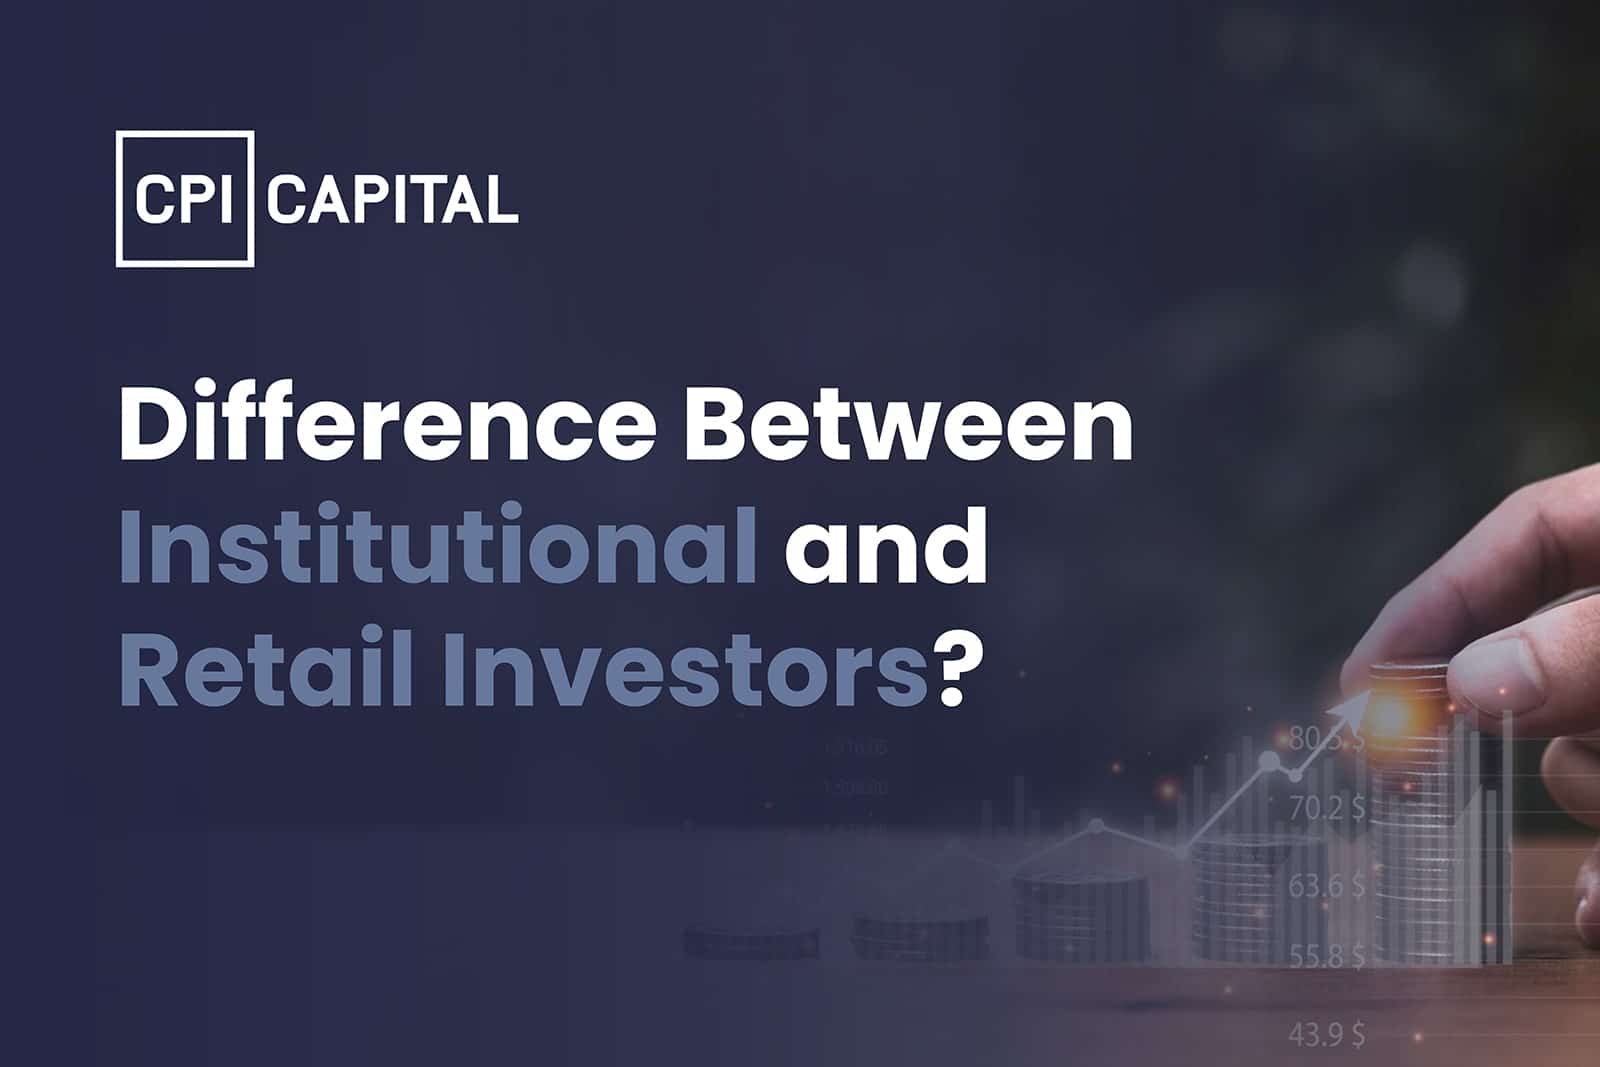 Differences between retail and institutional investors